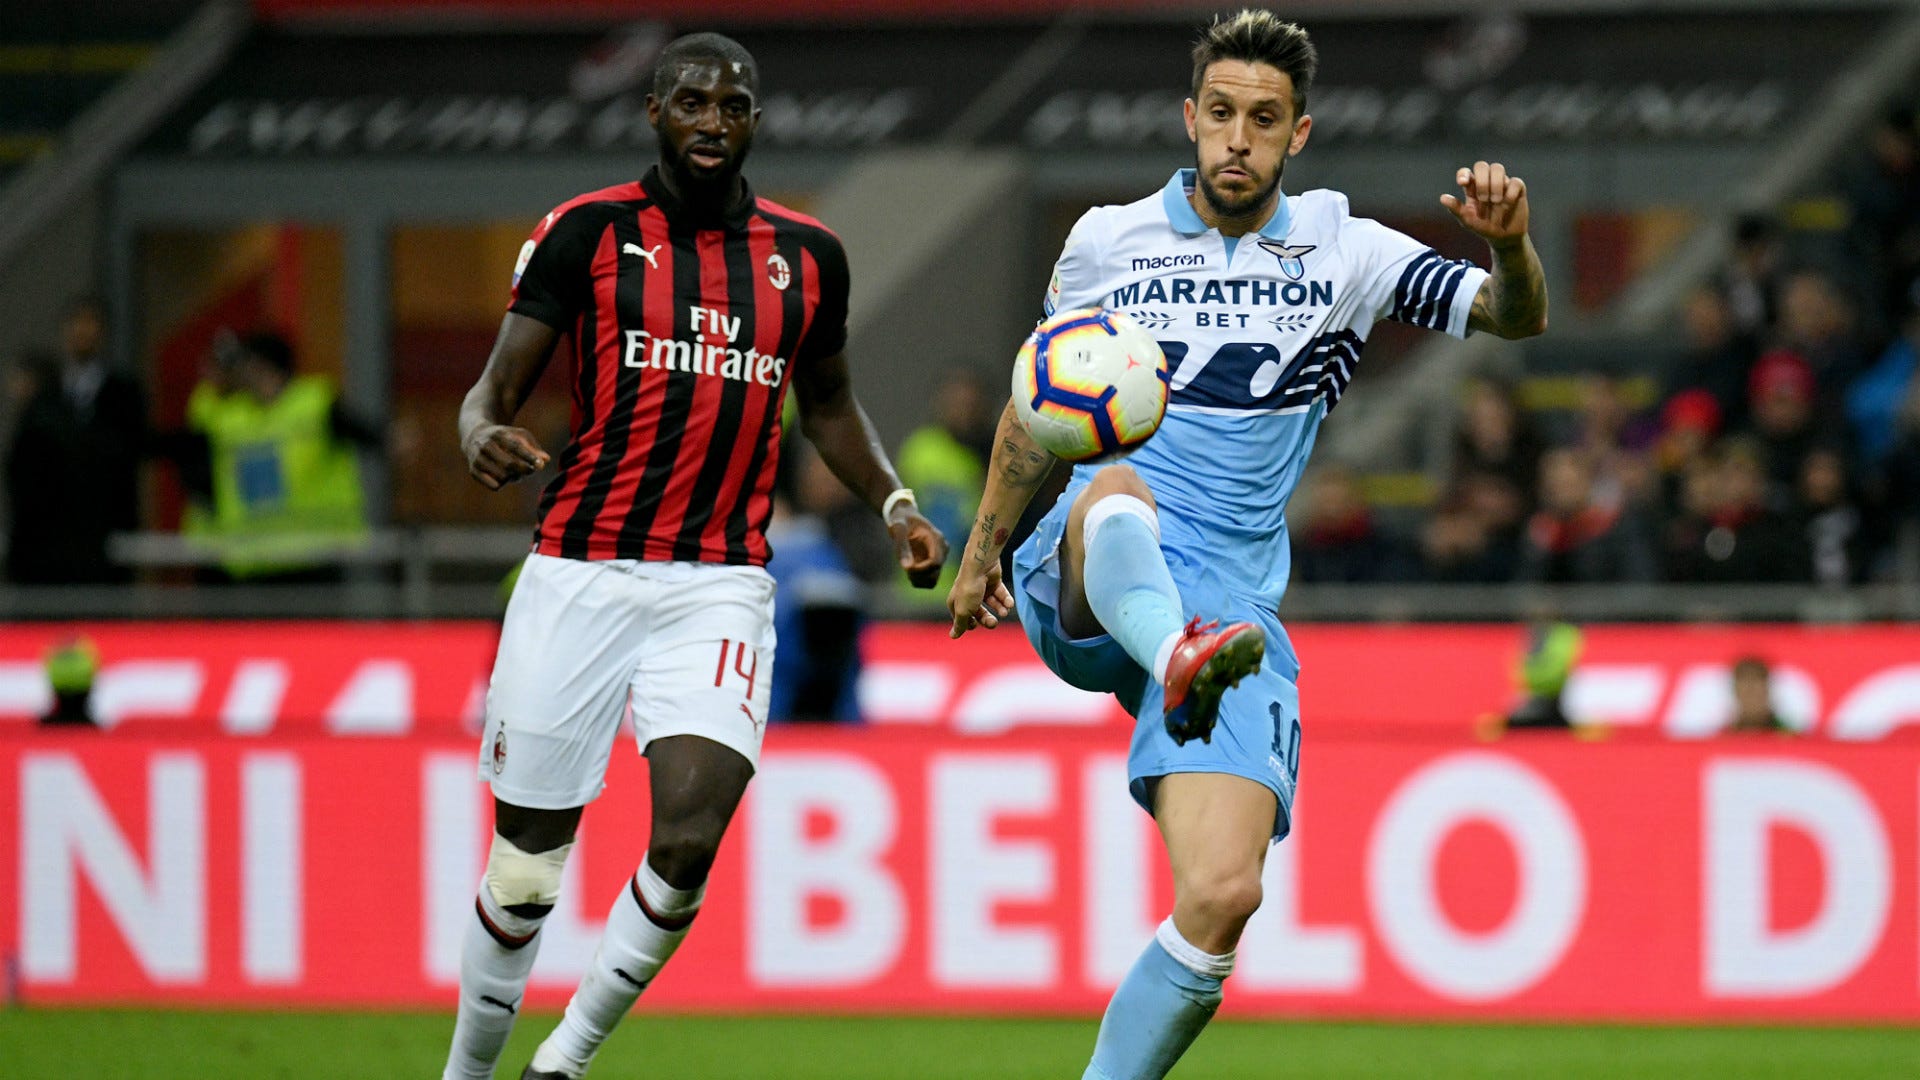 AC Milan vs Lazio Betting Tips: odds, team news, preview and predictions | Goal.com US